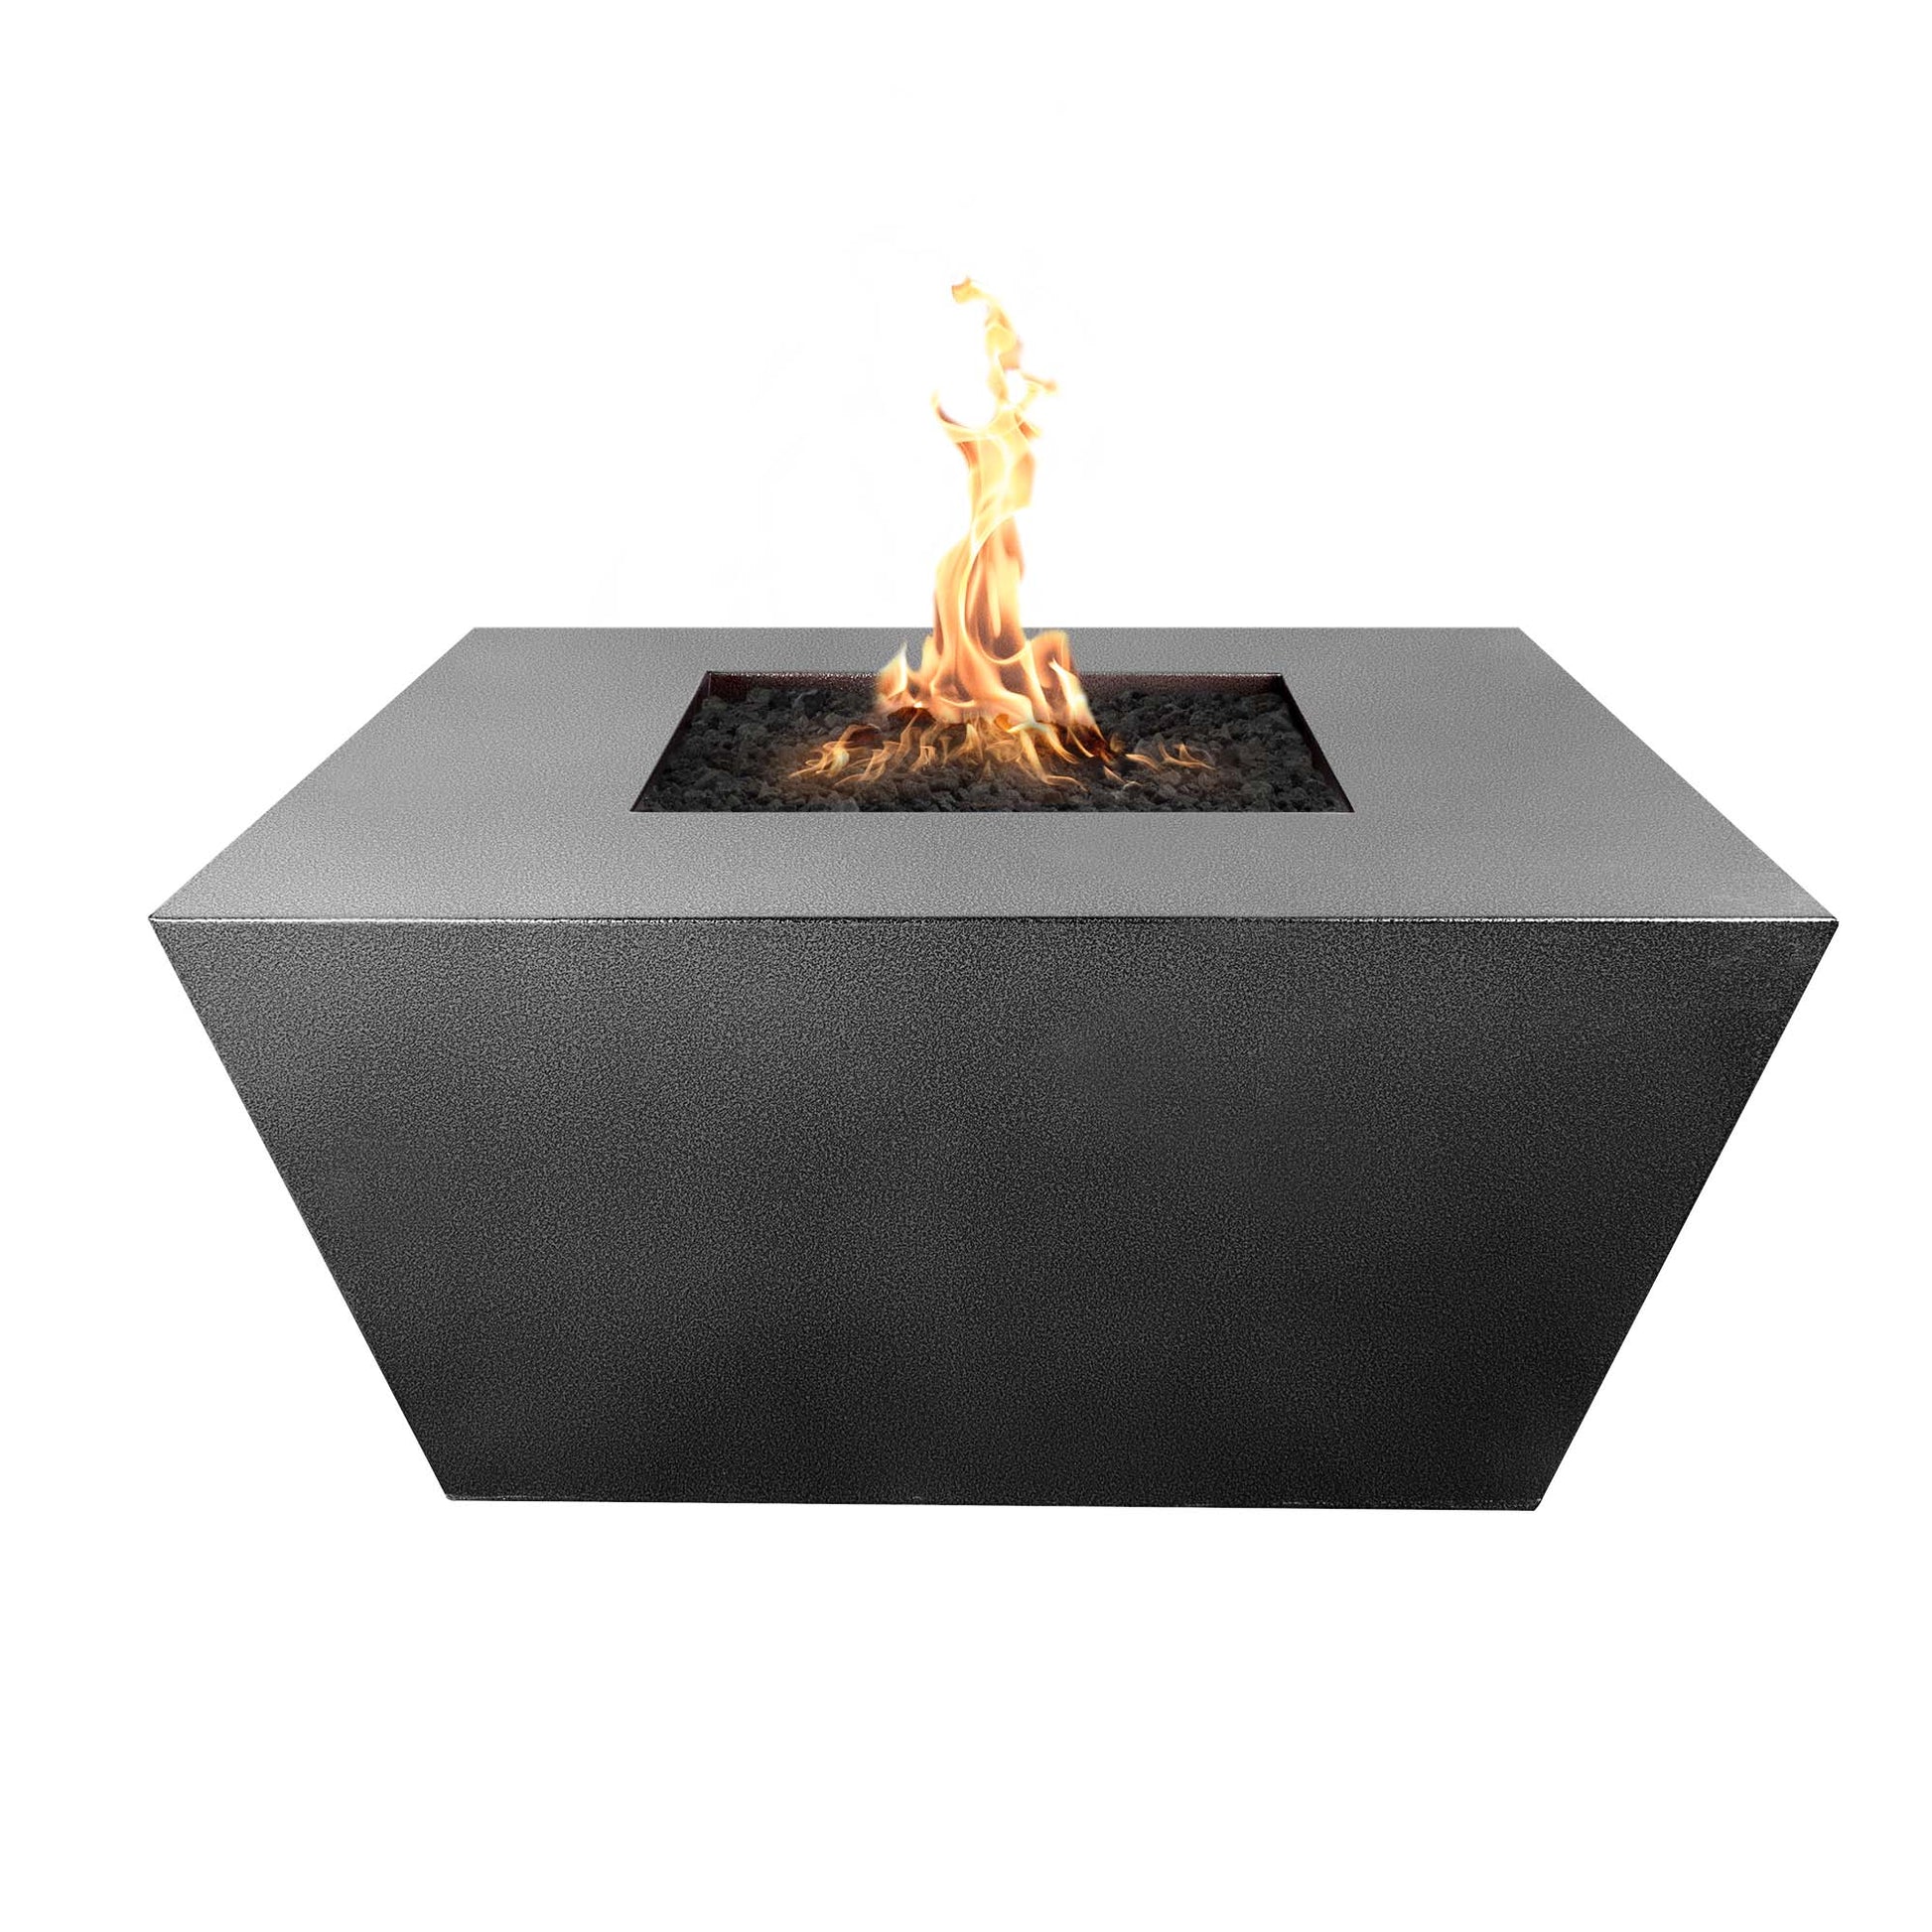 The Outdoor Plus Square Redan 36" Stainless Steel Natural Gas Fire Pit with Match Lit with Flame Sense Ignition